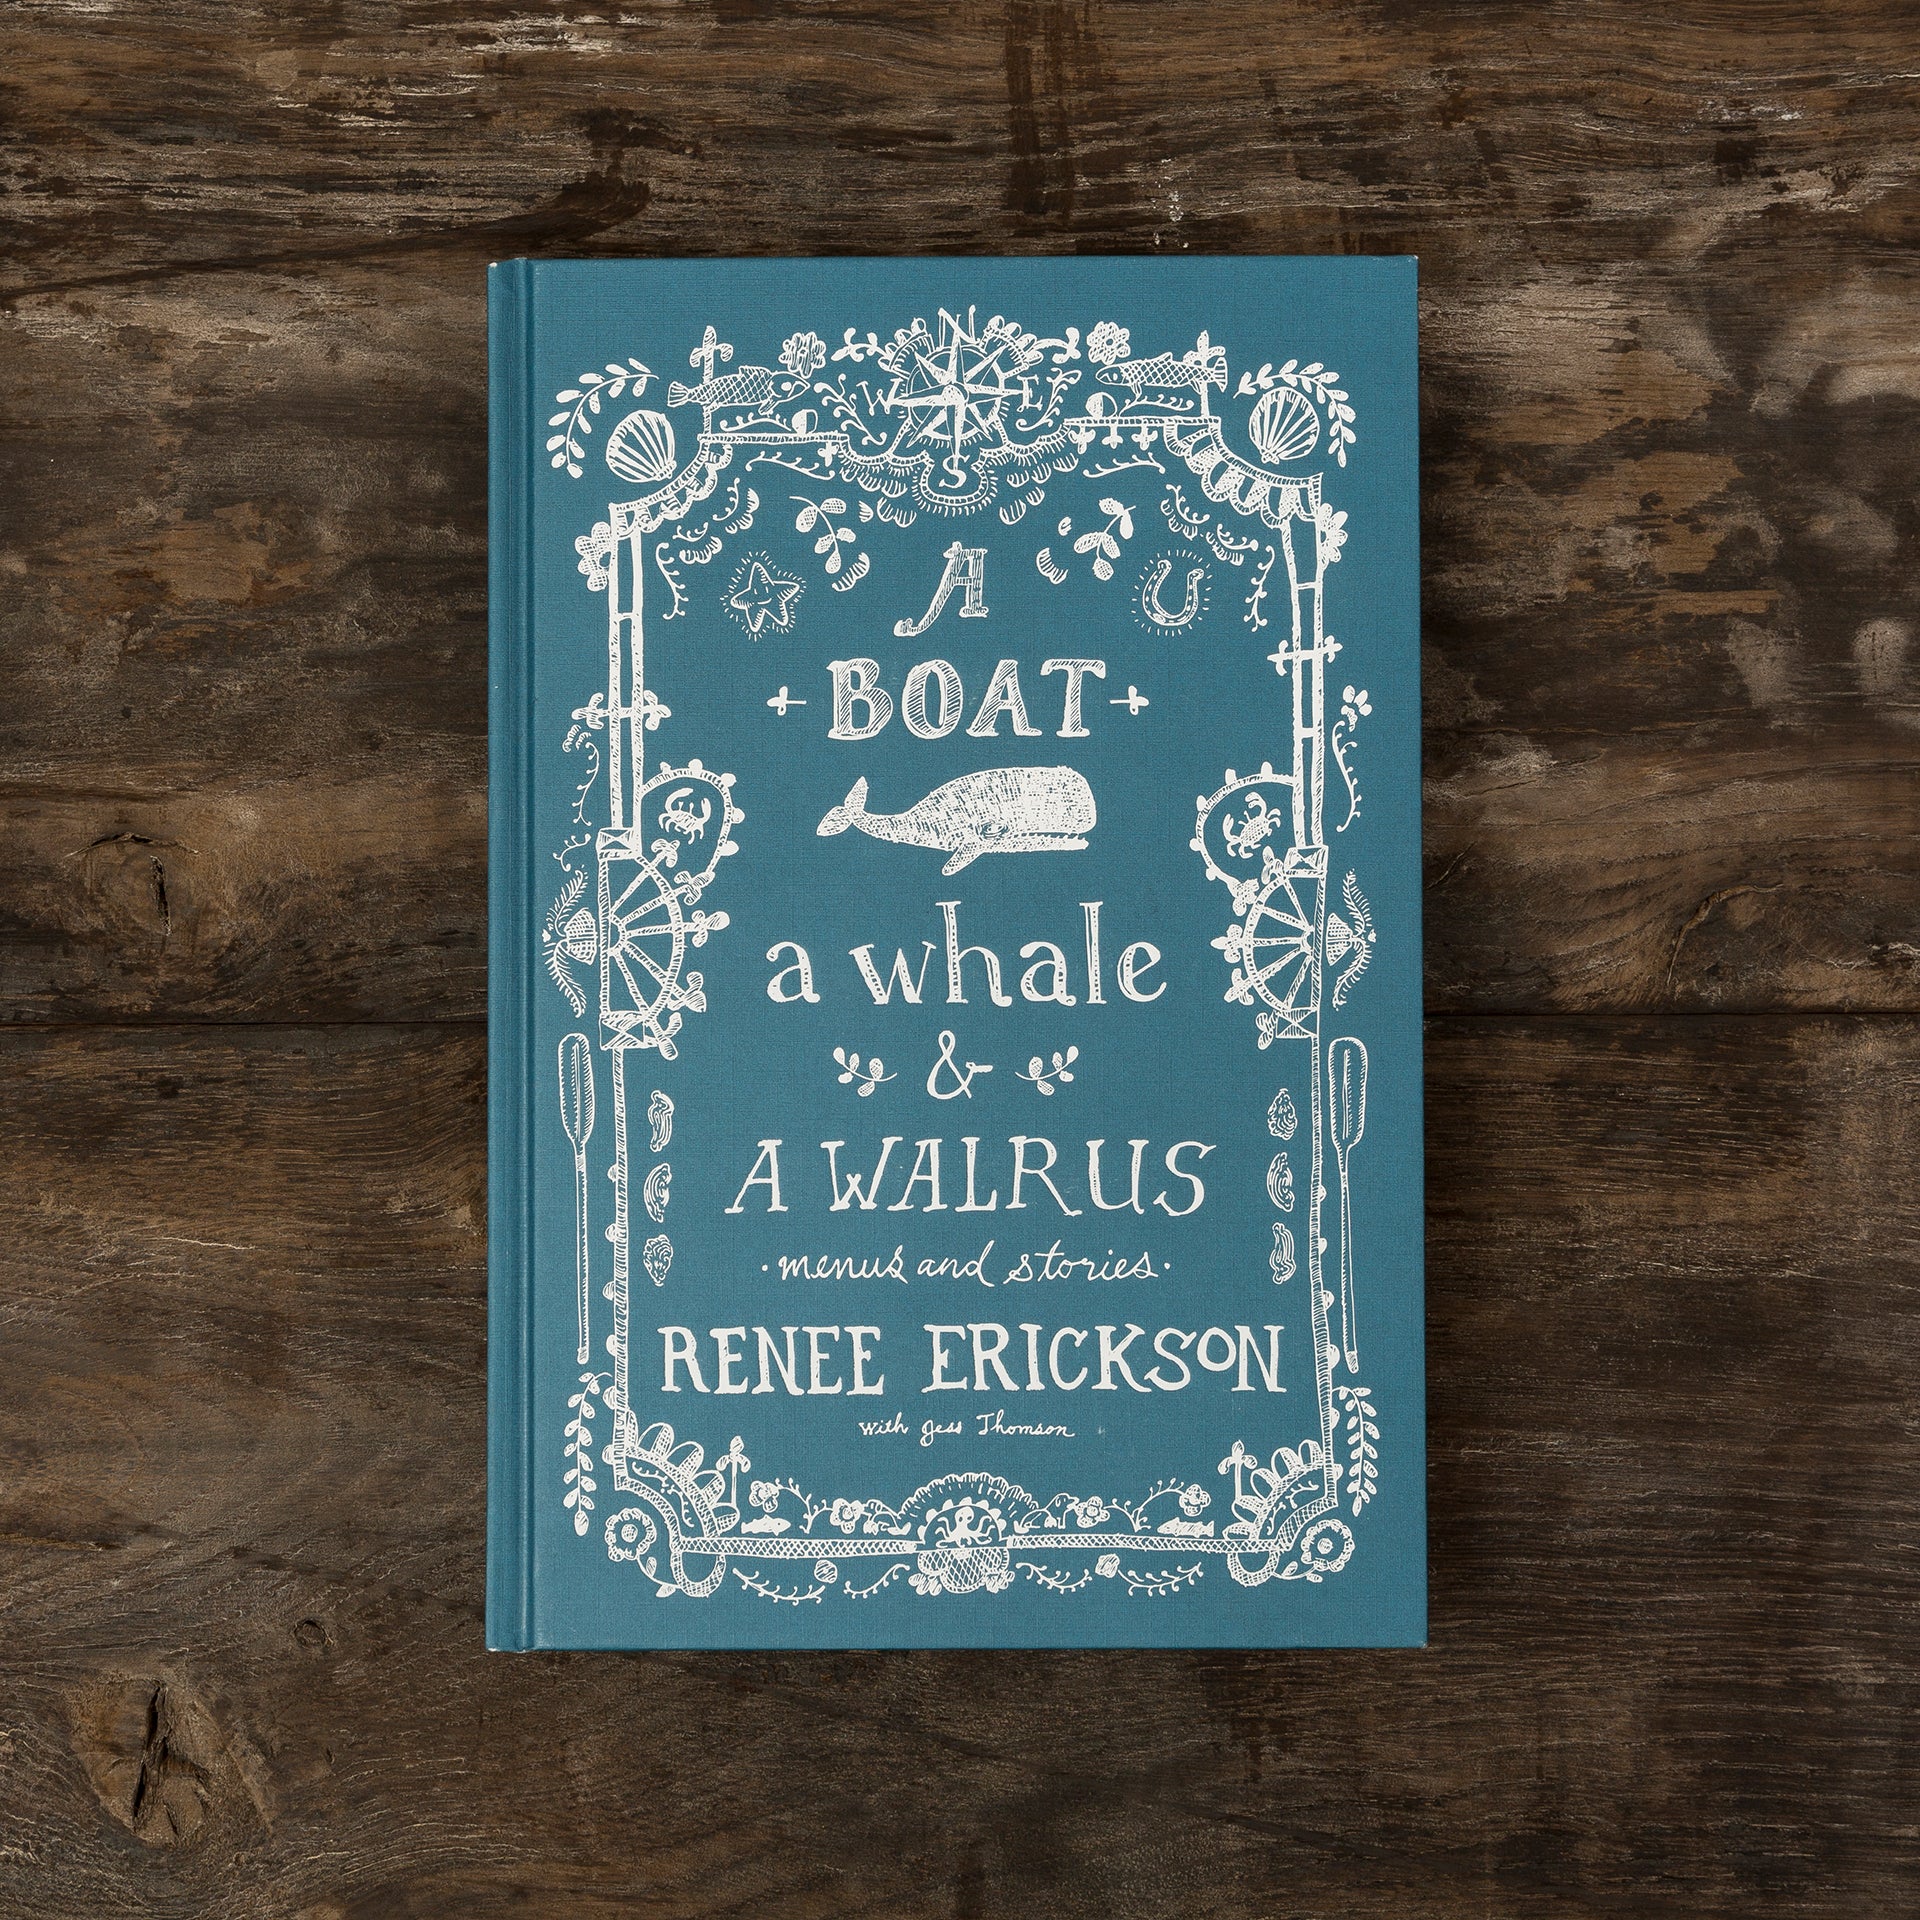 A Boat, a Whale, and a Walrus